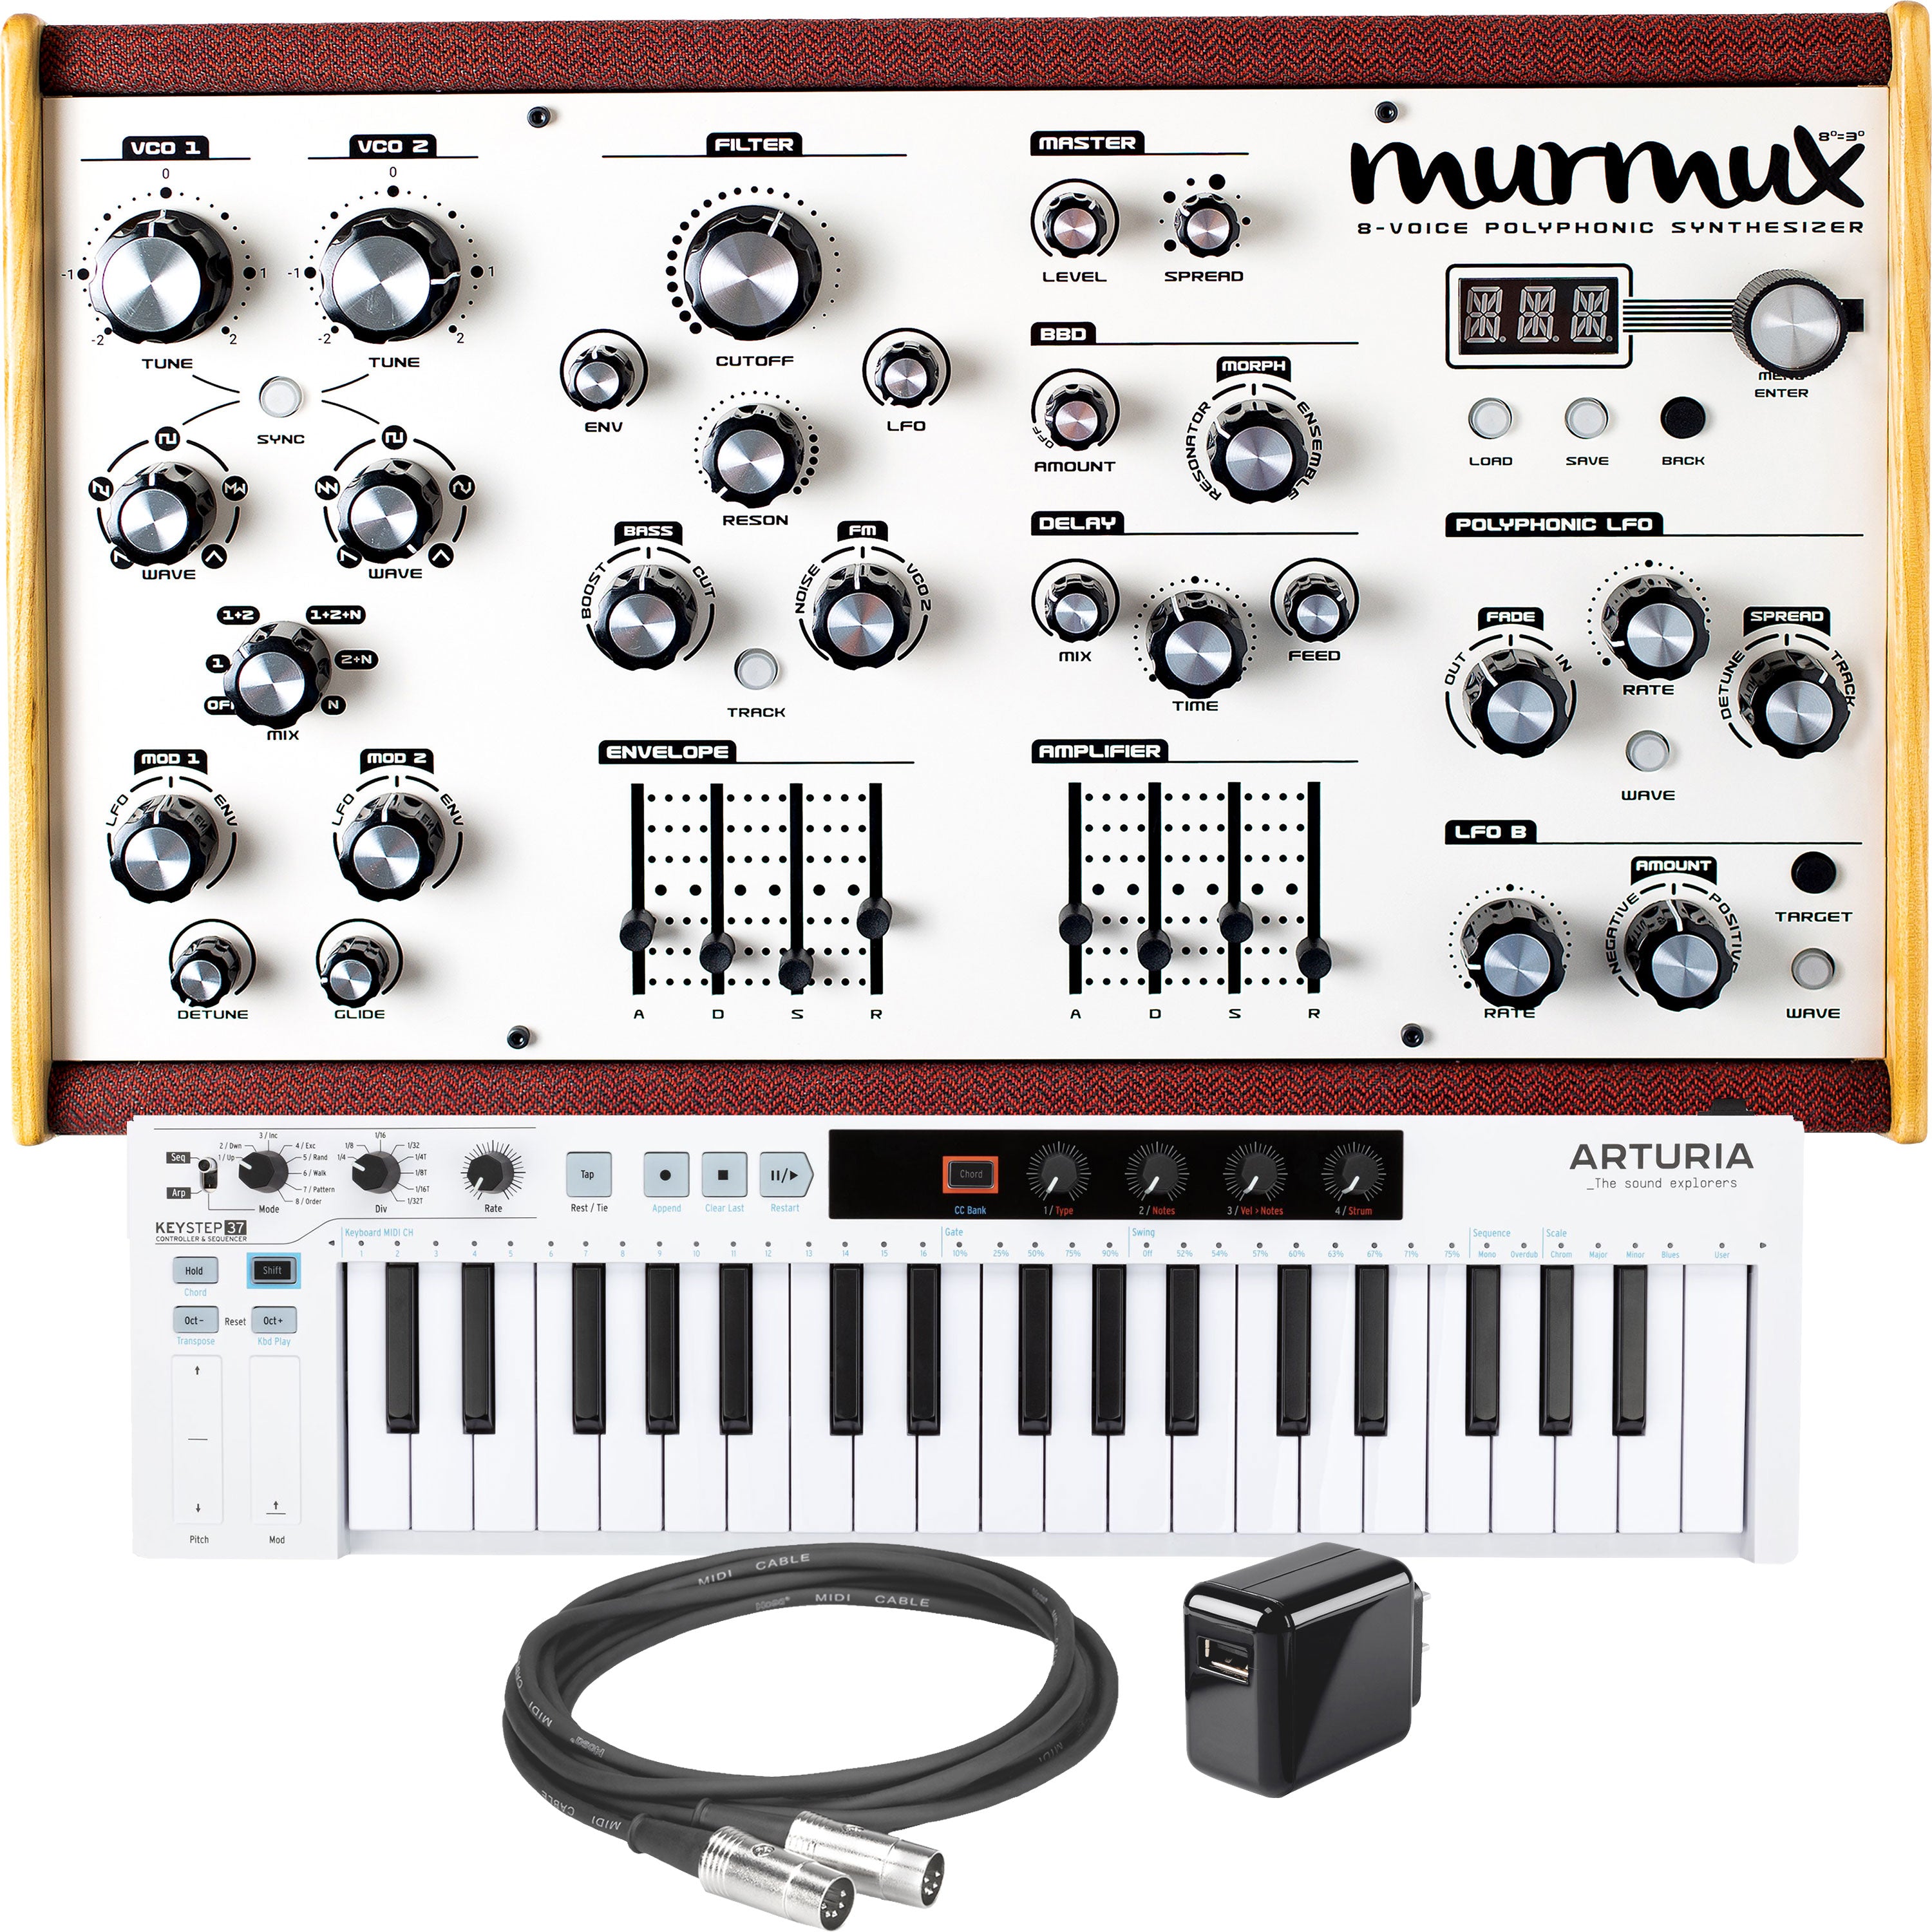 Dreadbox Murmux Adept Edition 8-Voice Polyphonic Synthesizer CONTROLLER RIG